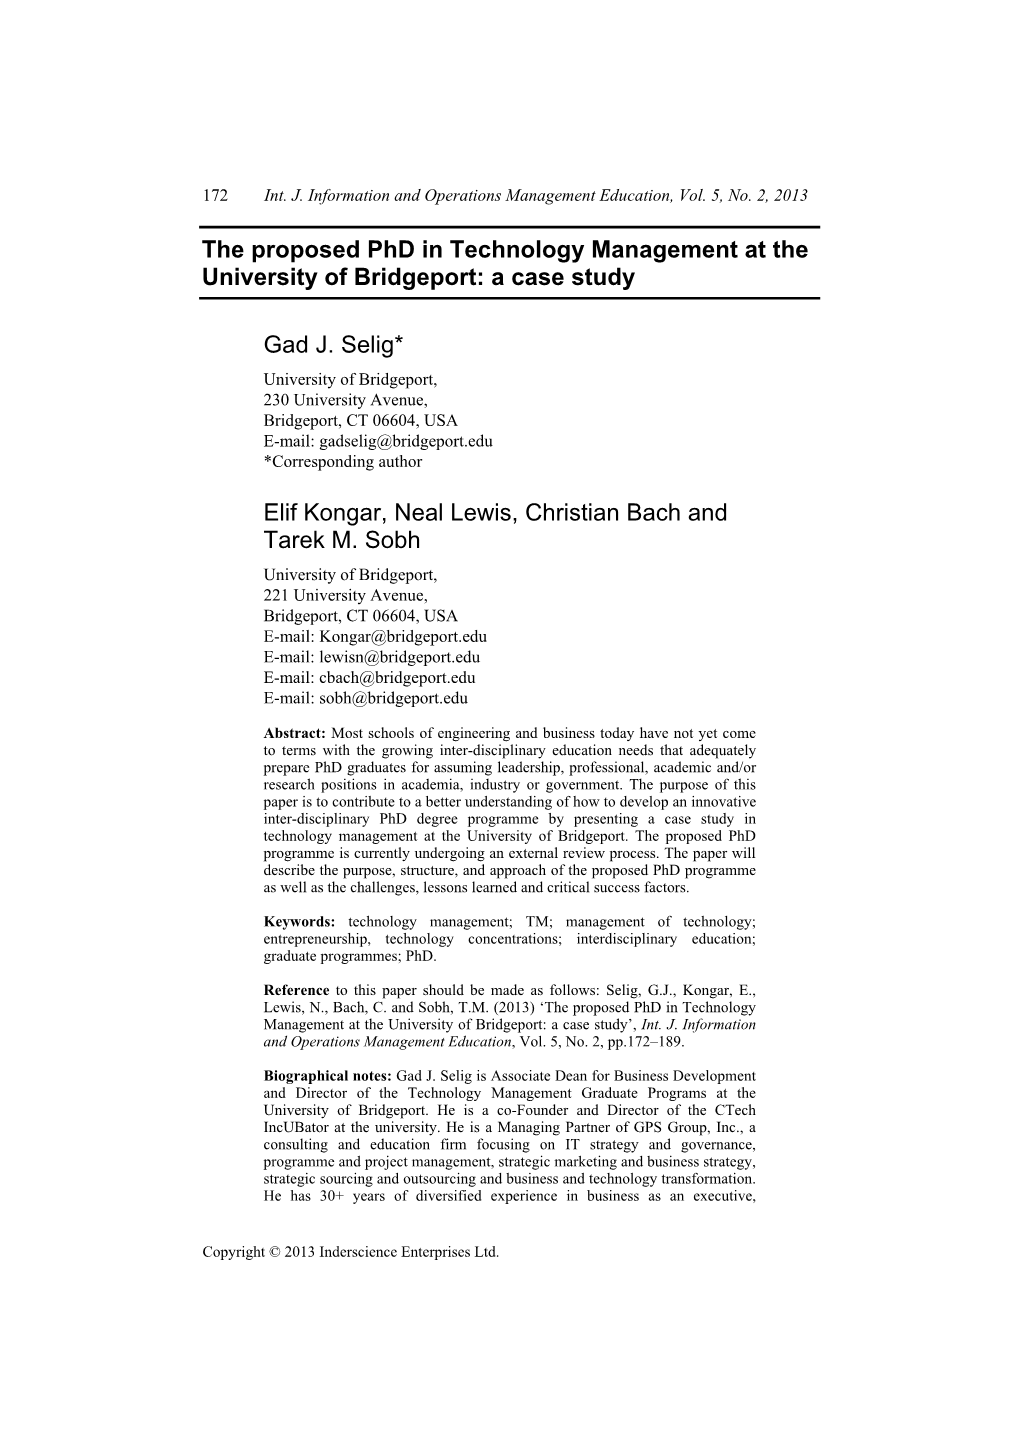 The Proposed Phd in Technology Management at the University of Bridgeport: a Case Study